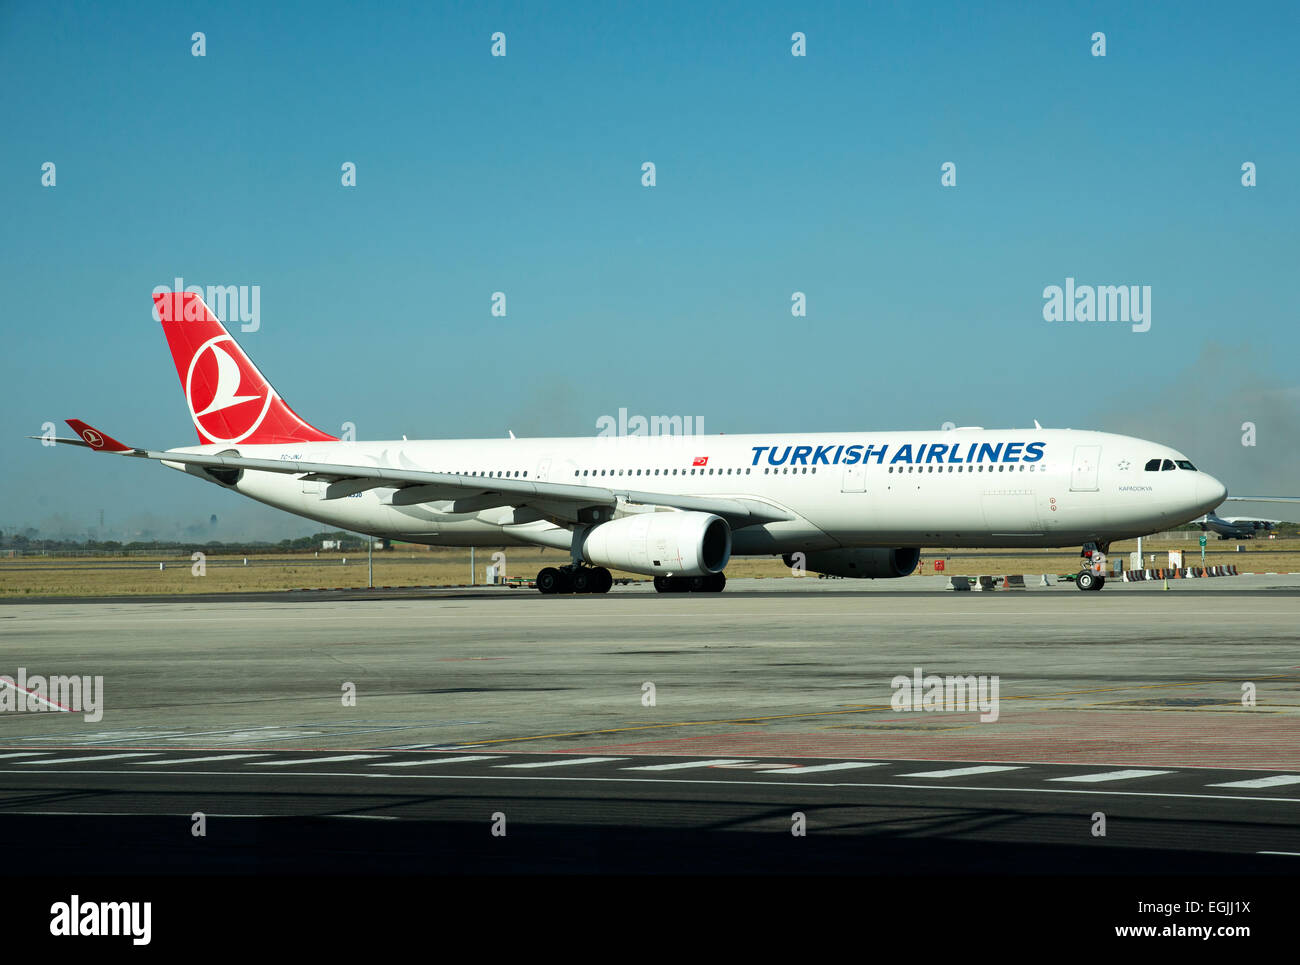 Turkish Airlines A330 Airbus on taxiway Cape Town International Airport South Africa Stock Photo